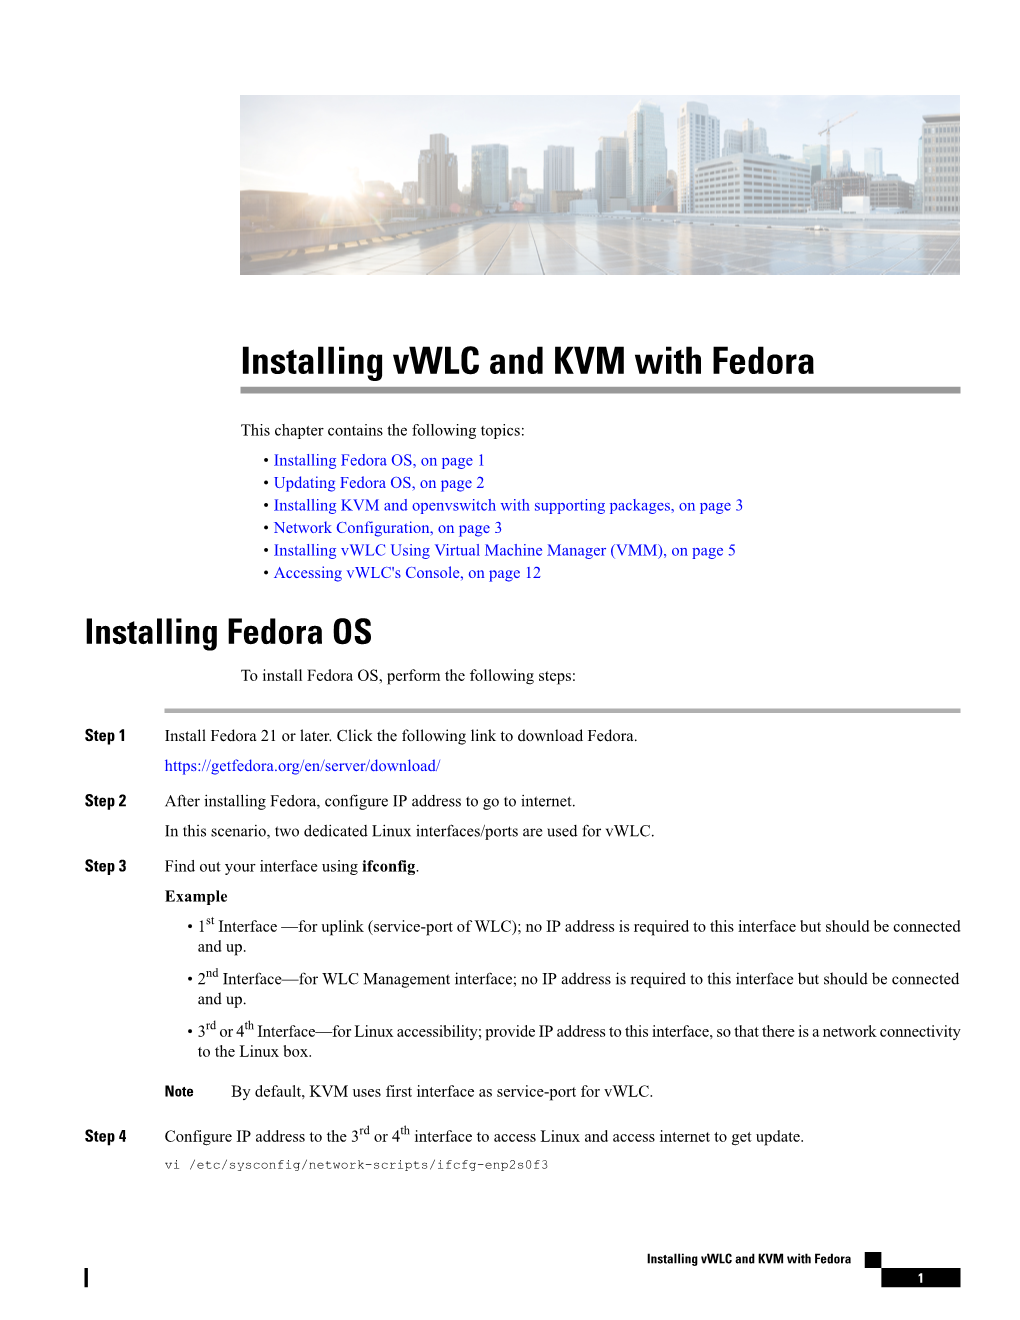 Installing Vwlc and KVM with Fedora